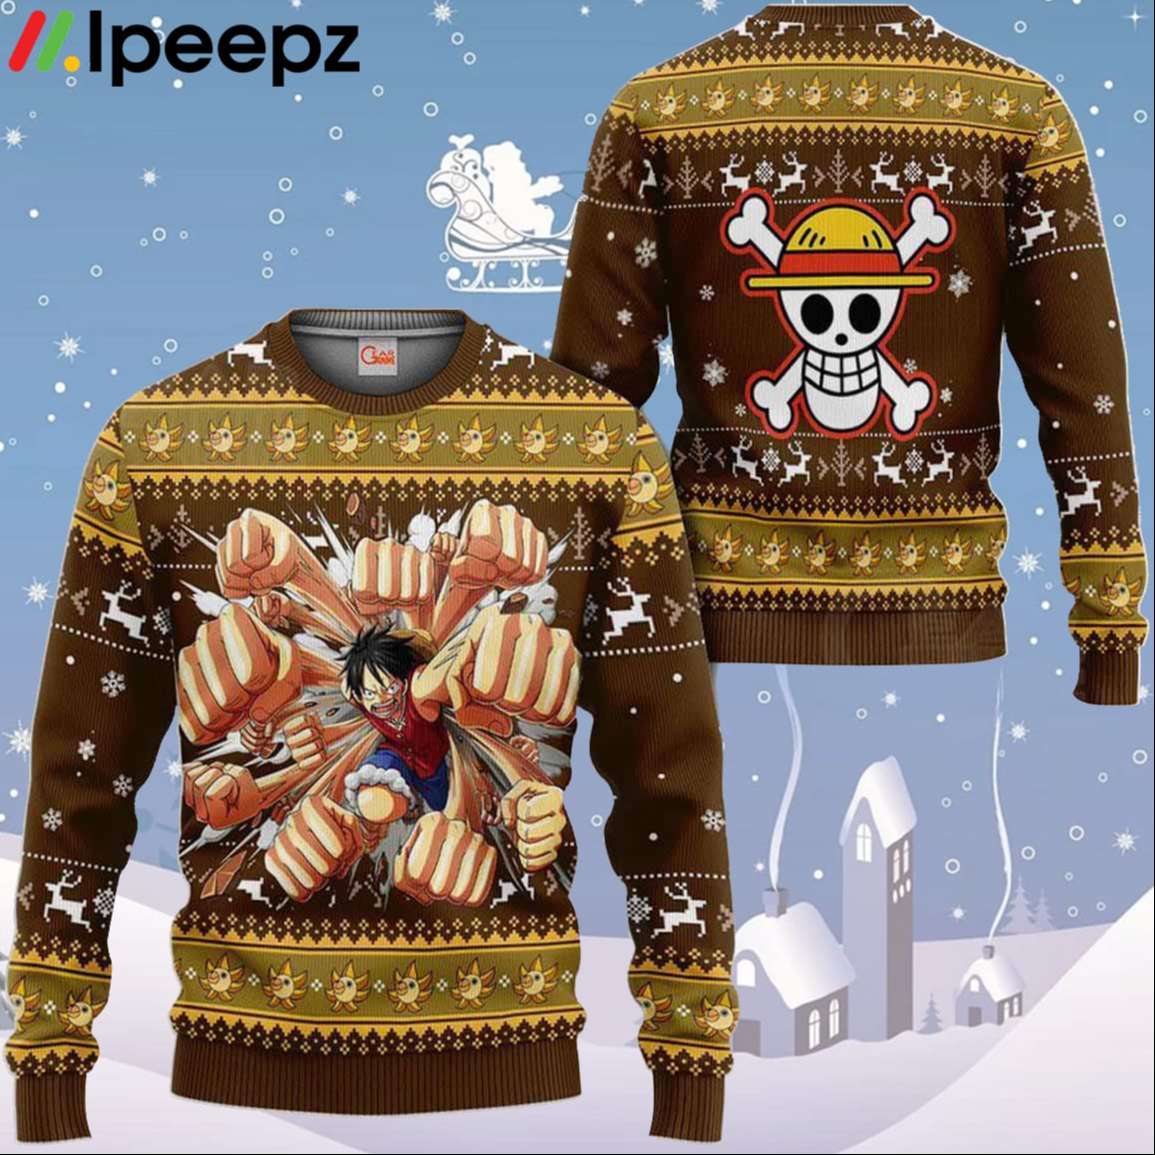 One Piece Luffy Gear 5 Ugly Christmas Sweater Xmas Gift